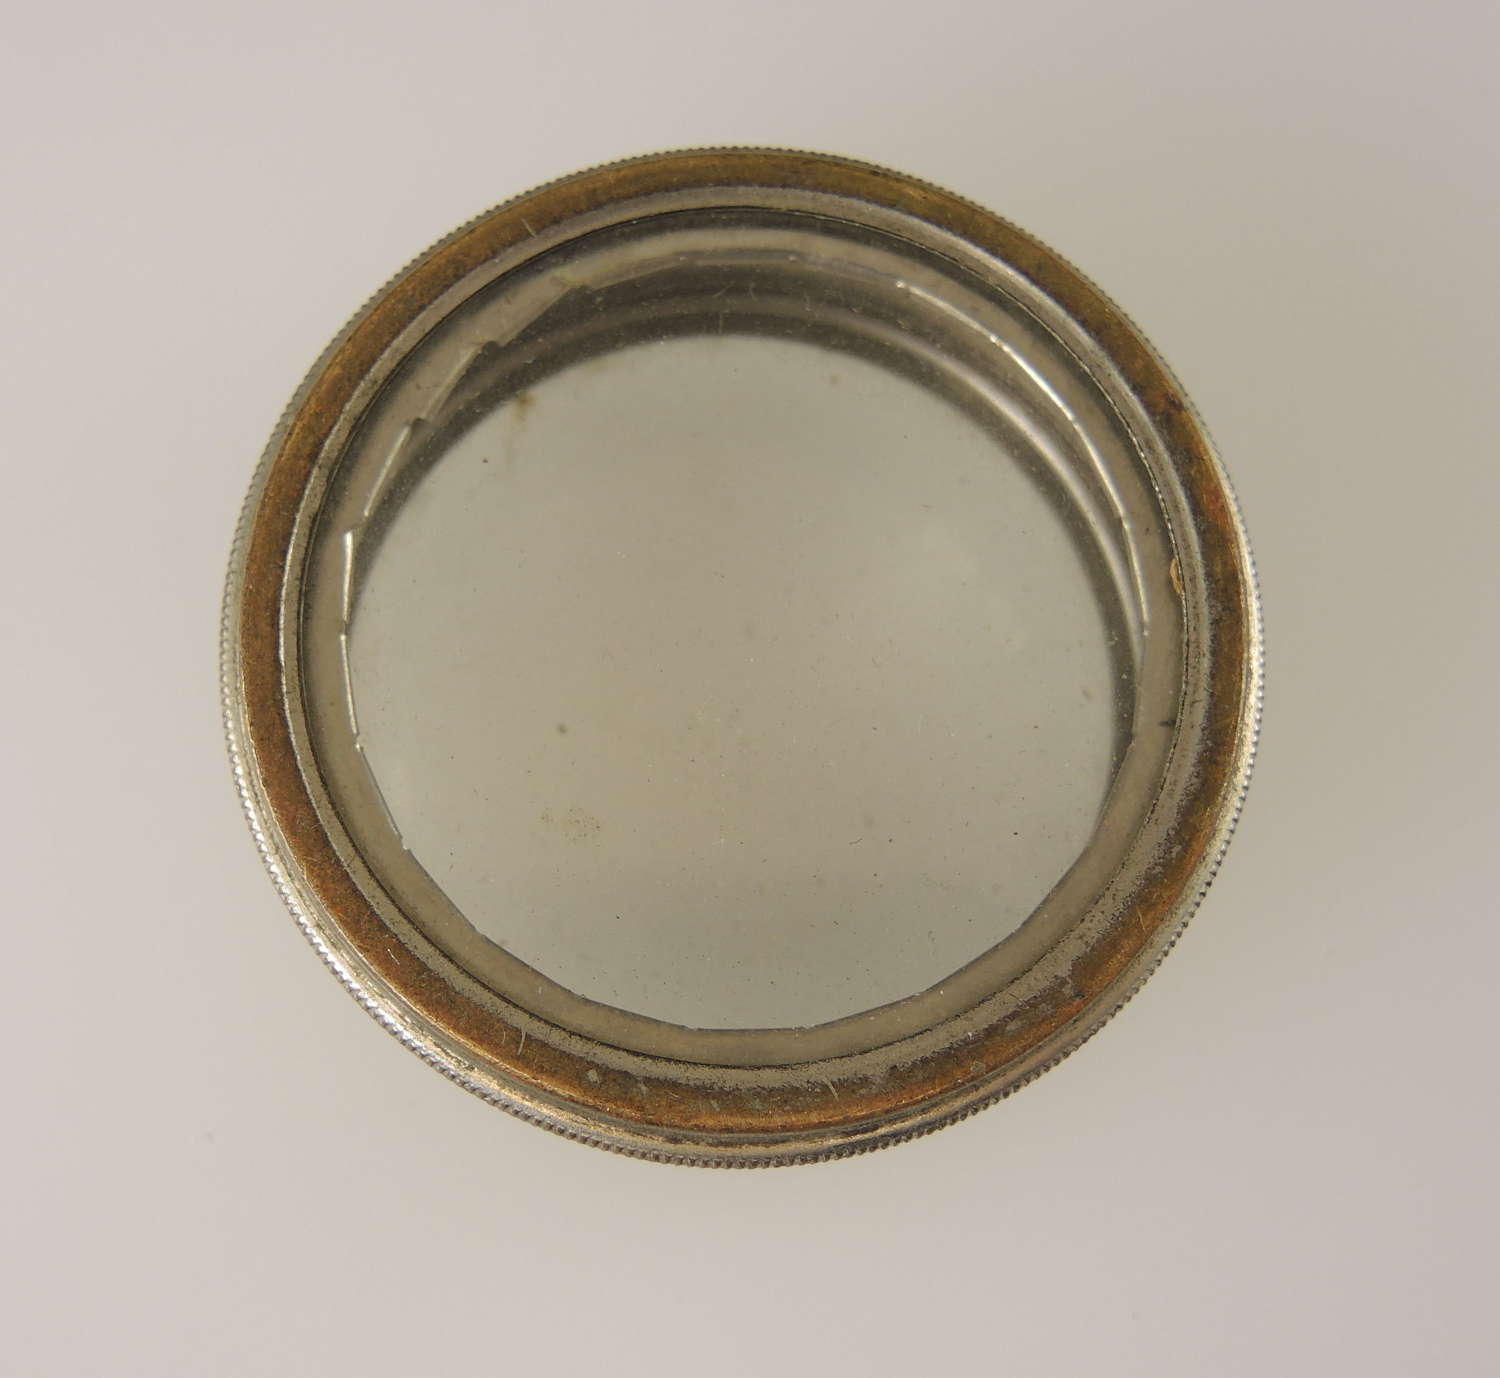 Elgin Watch Co movement container / parts tin c1900